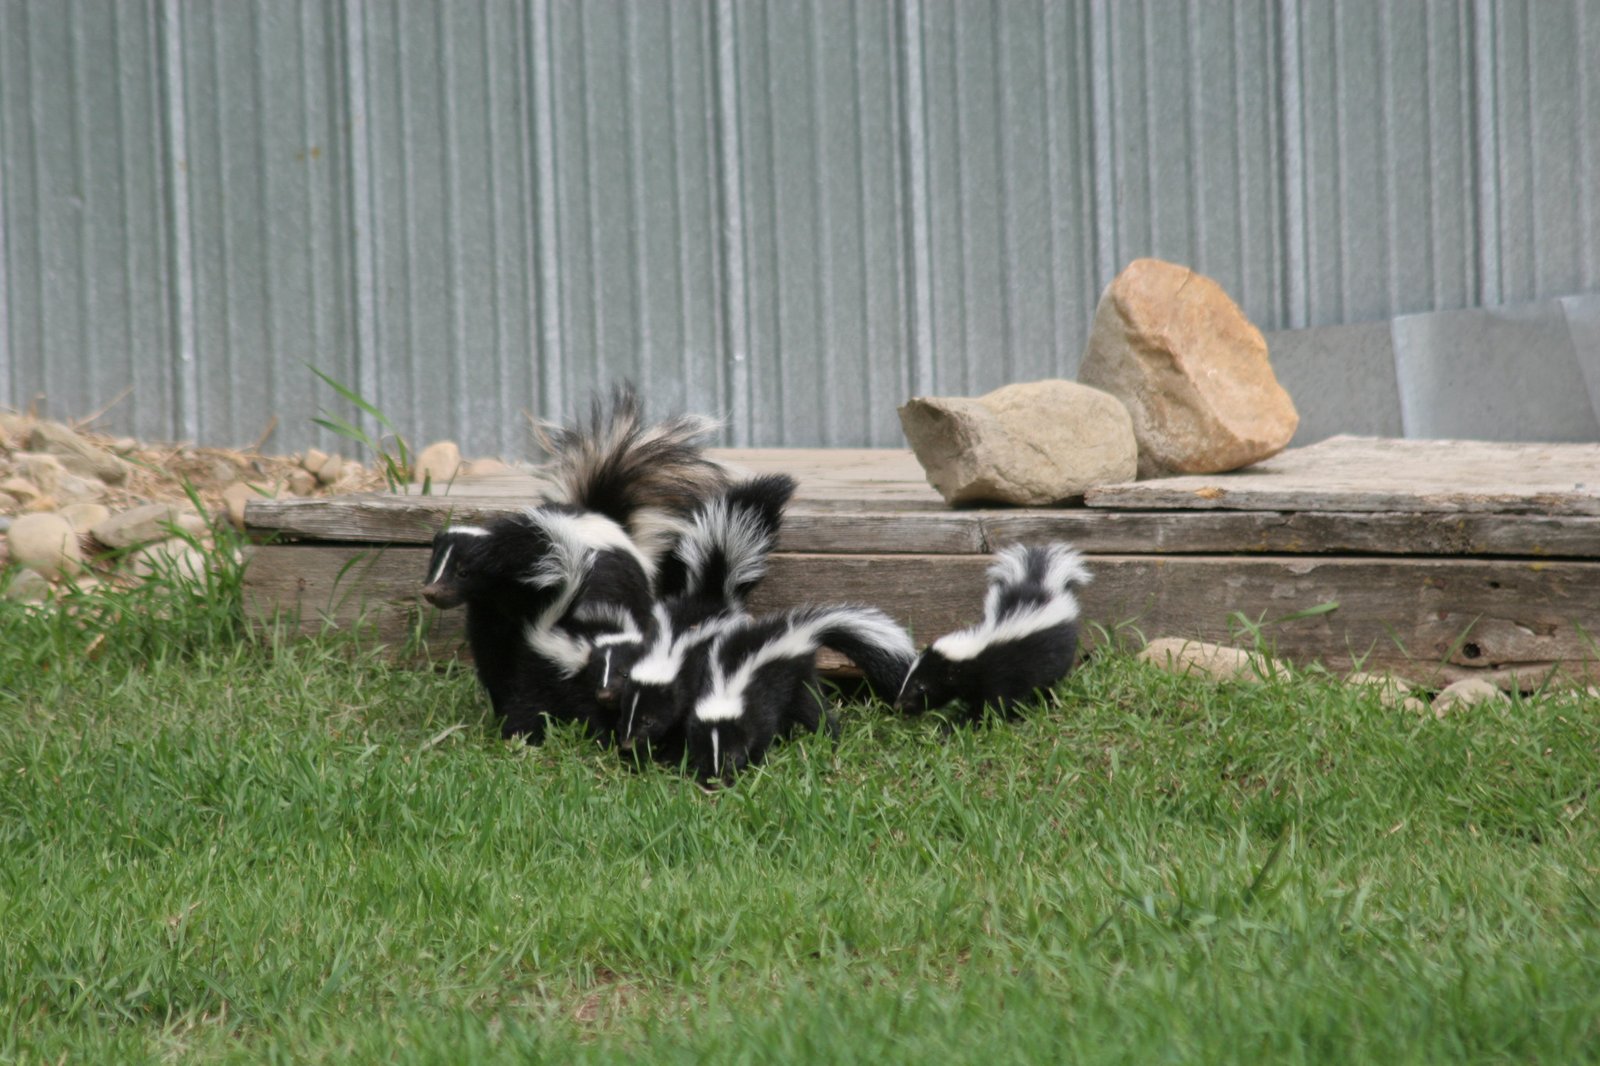 A group of skunks is called a surfeit.